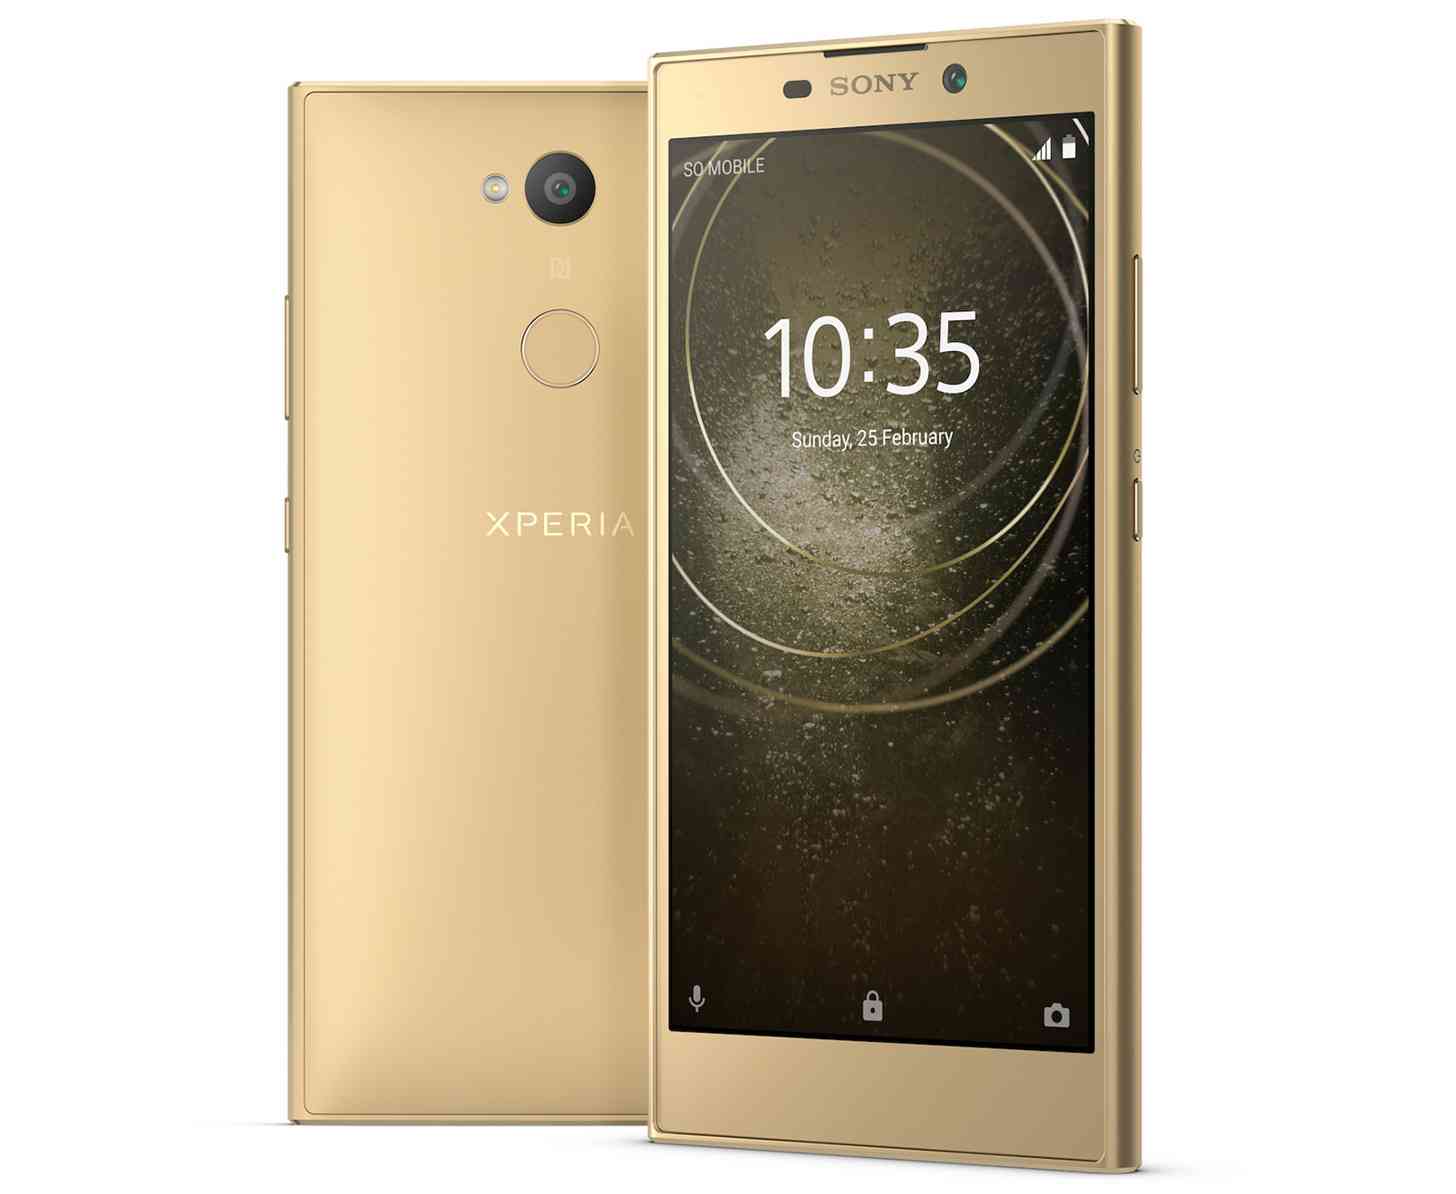 Sony Xperia L2 official